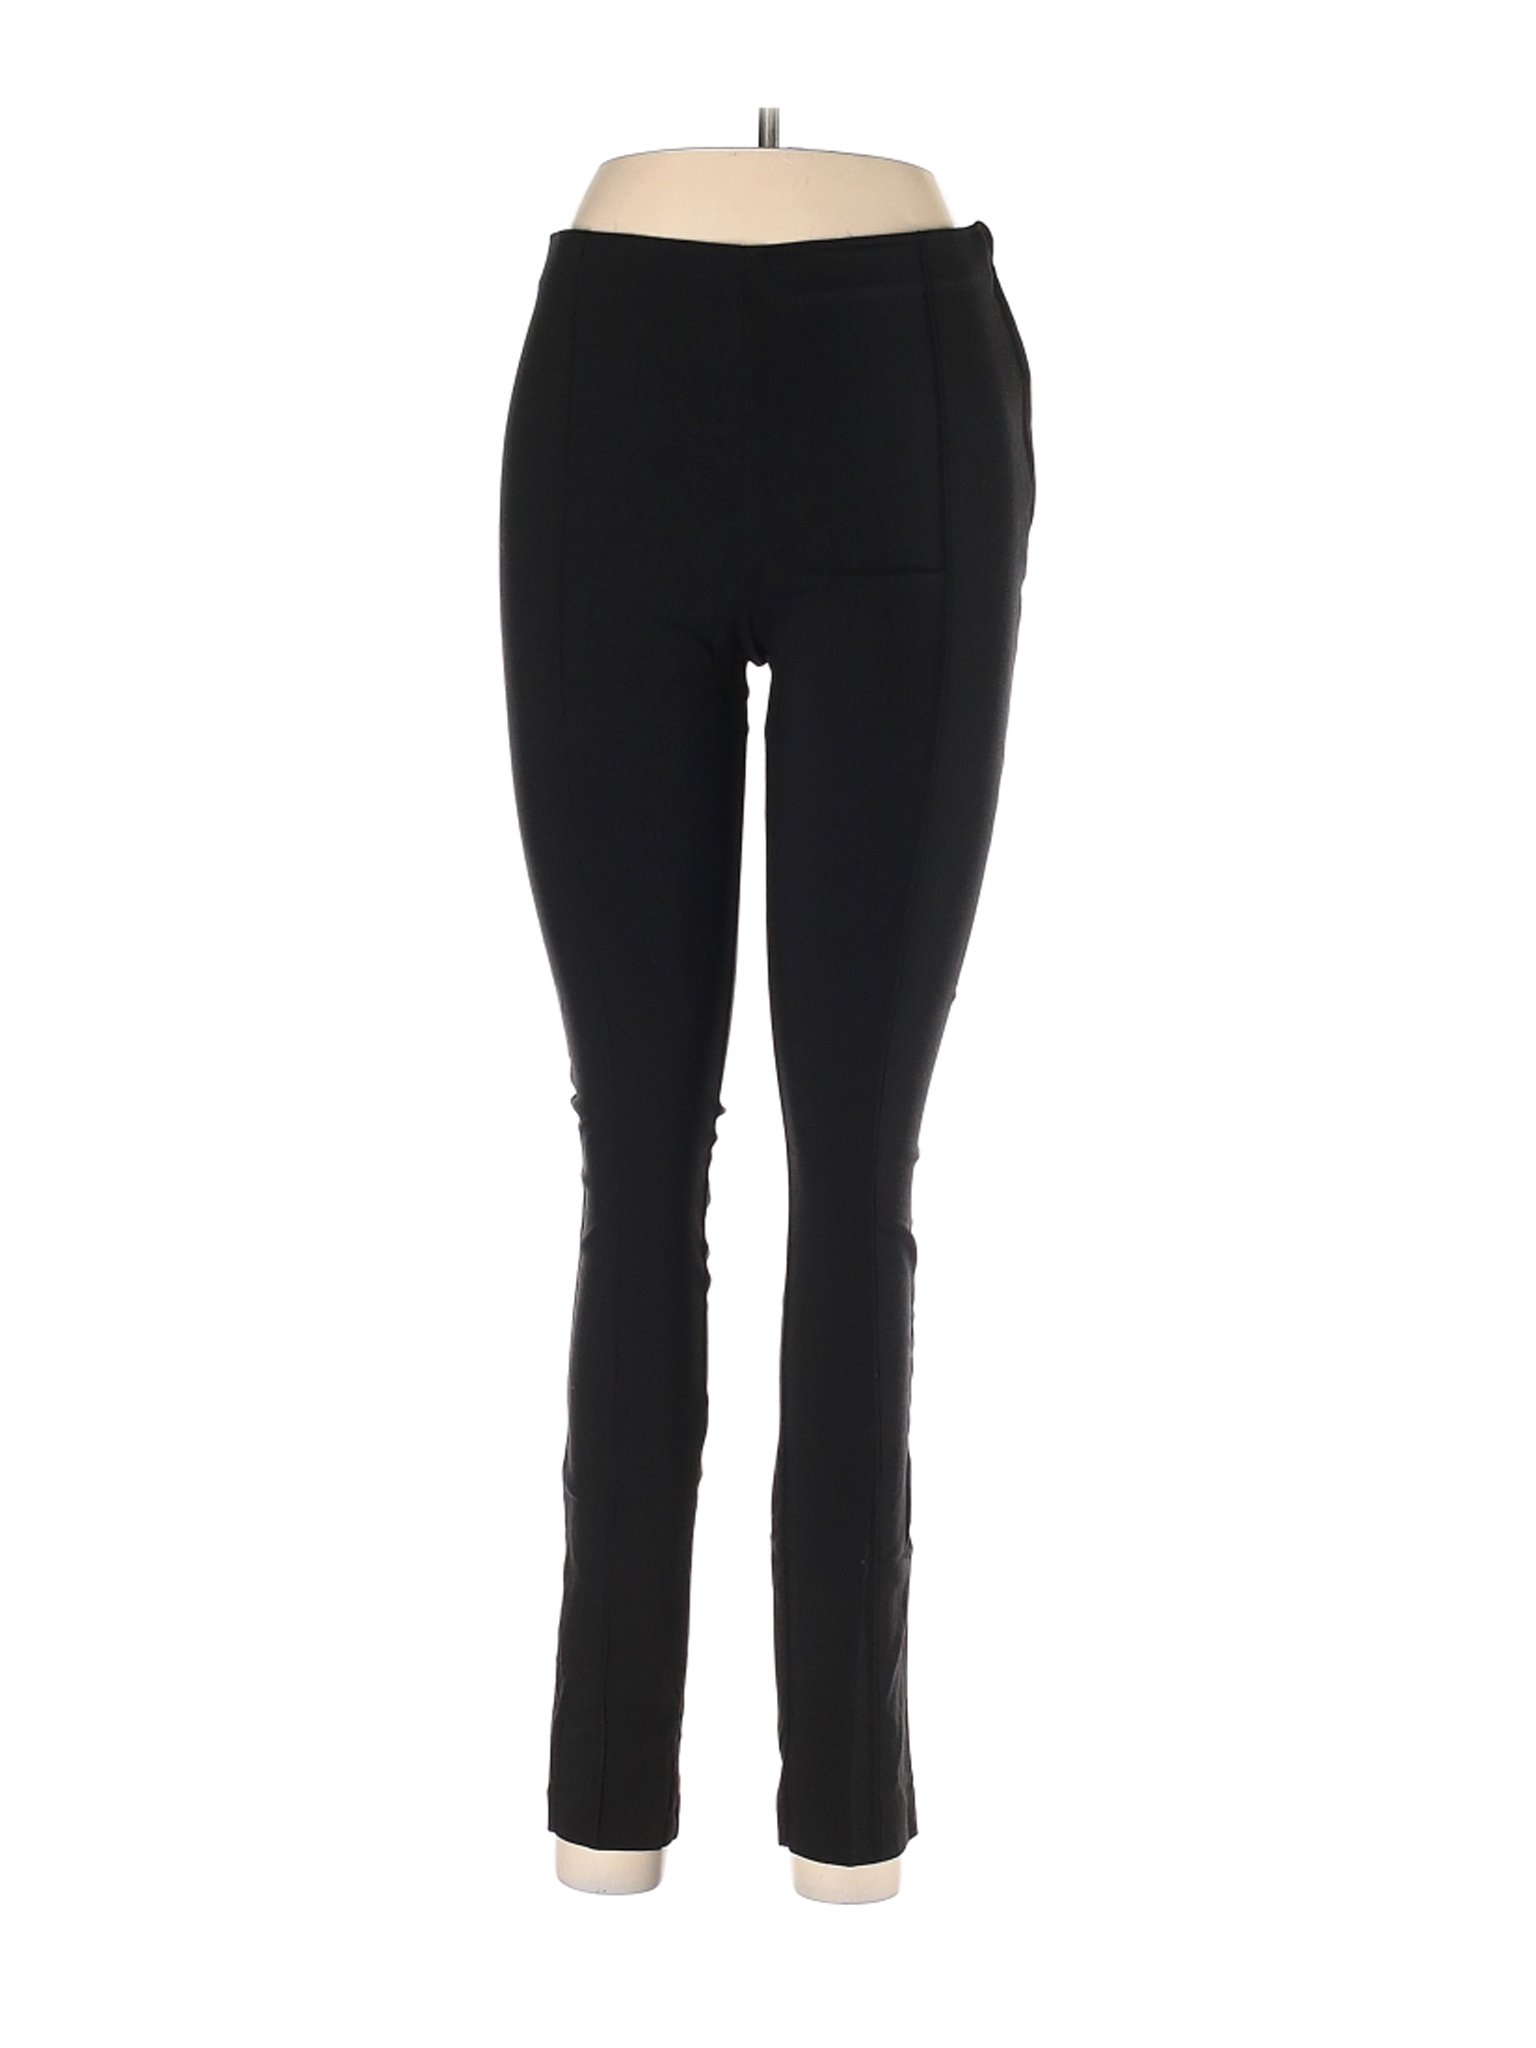 Primark Ladies Womens Black Leggings New with Tags Sustainable Cotton Sizes  4-24